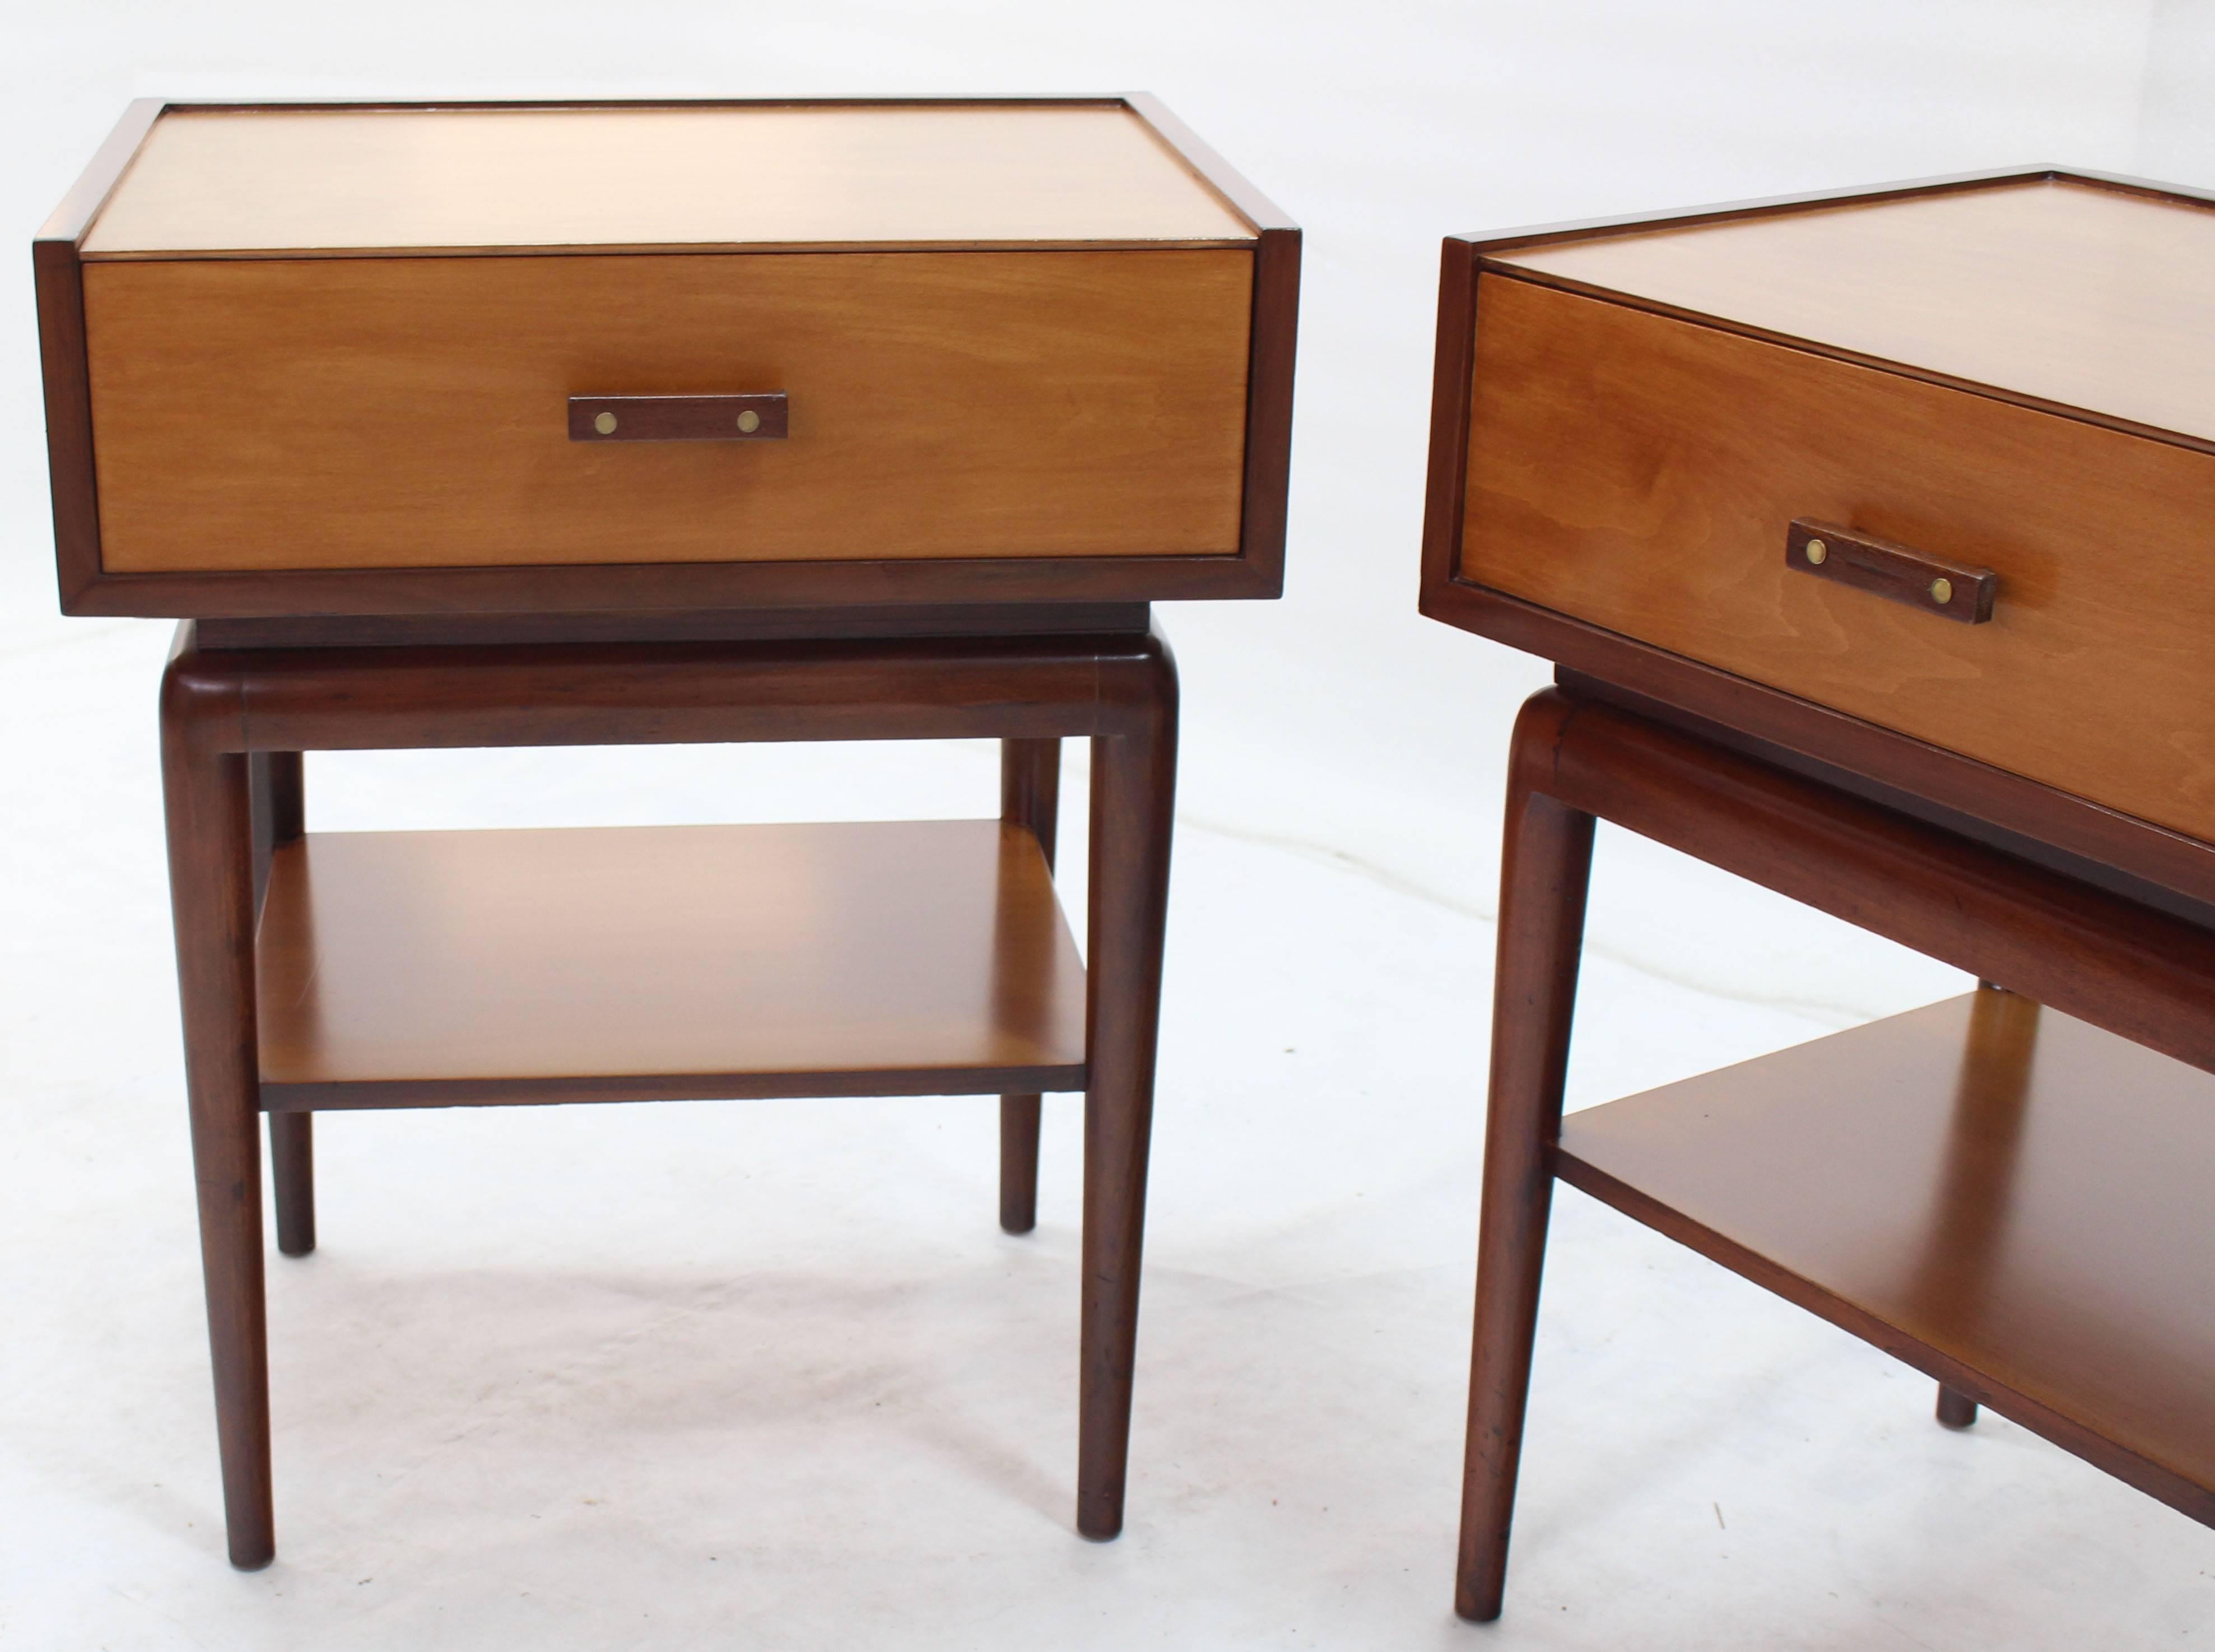 20th Century Pair of Two-Tone One Drawer Nightstands on Tall Tapered Legs